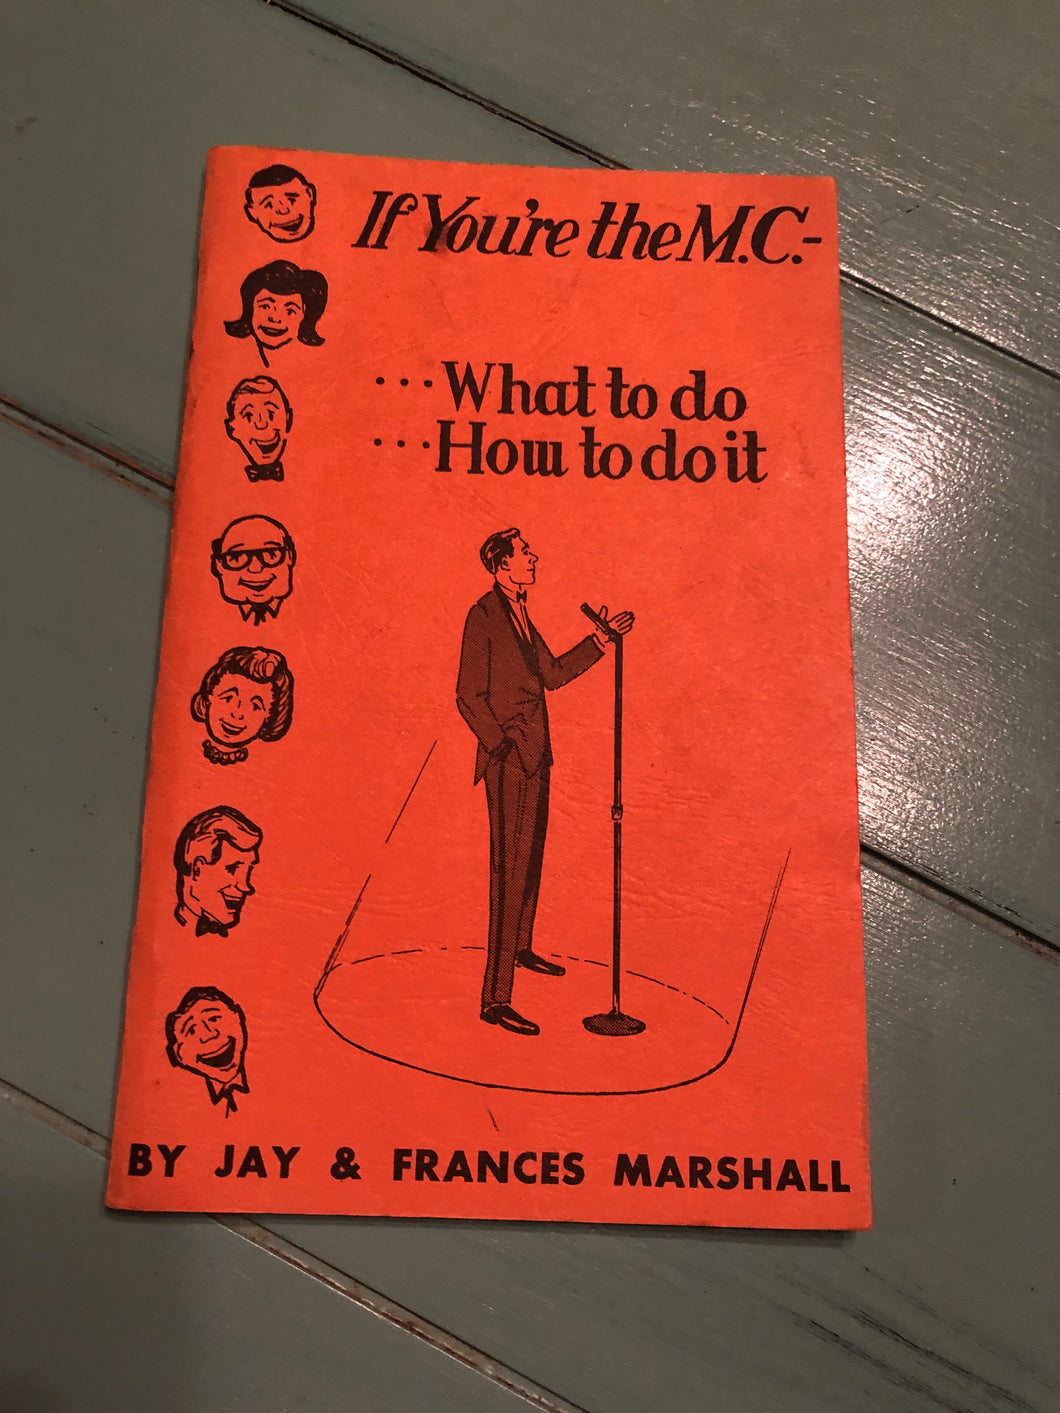 If You're the M.C...by Jay & Frances Marshall